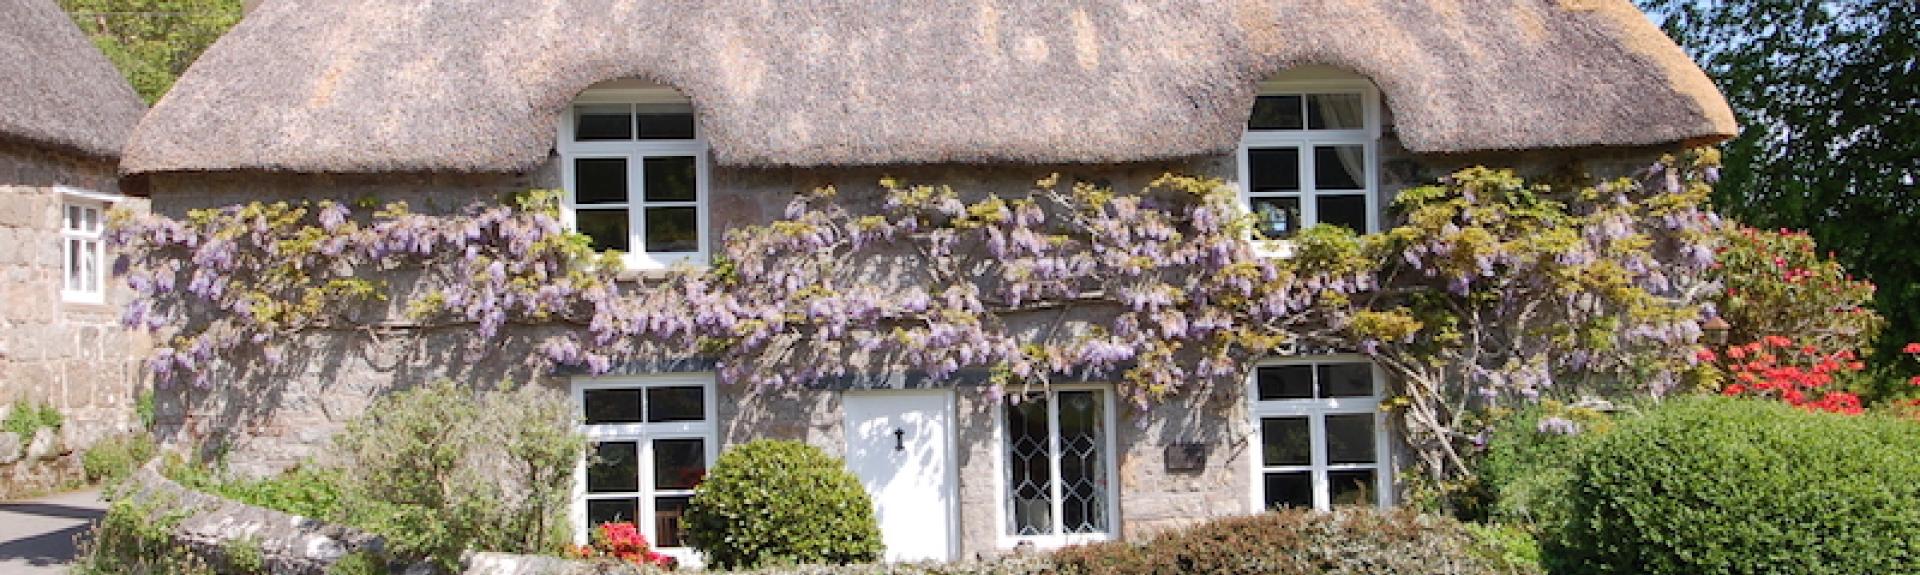 A thatched country cottage on Dartmoor overlooks its front hedge